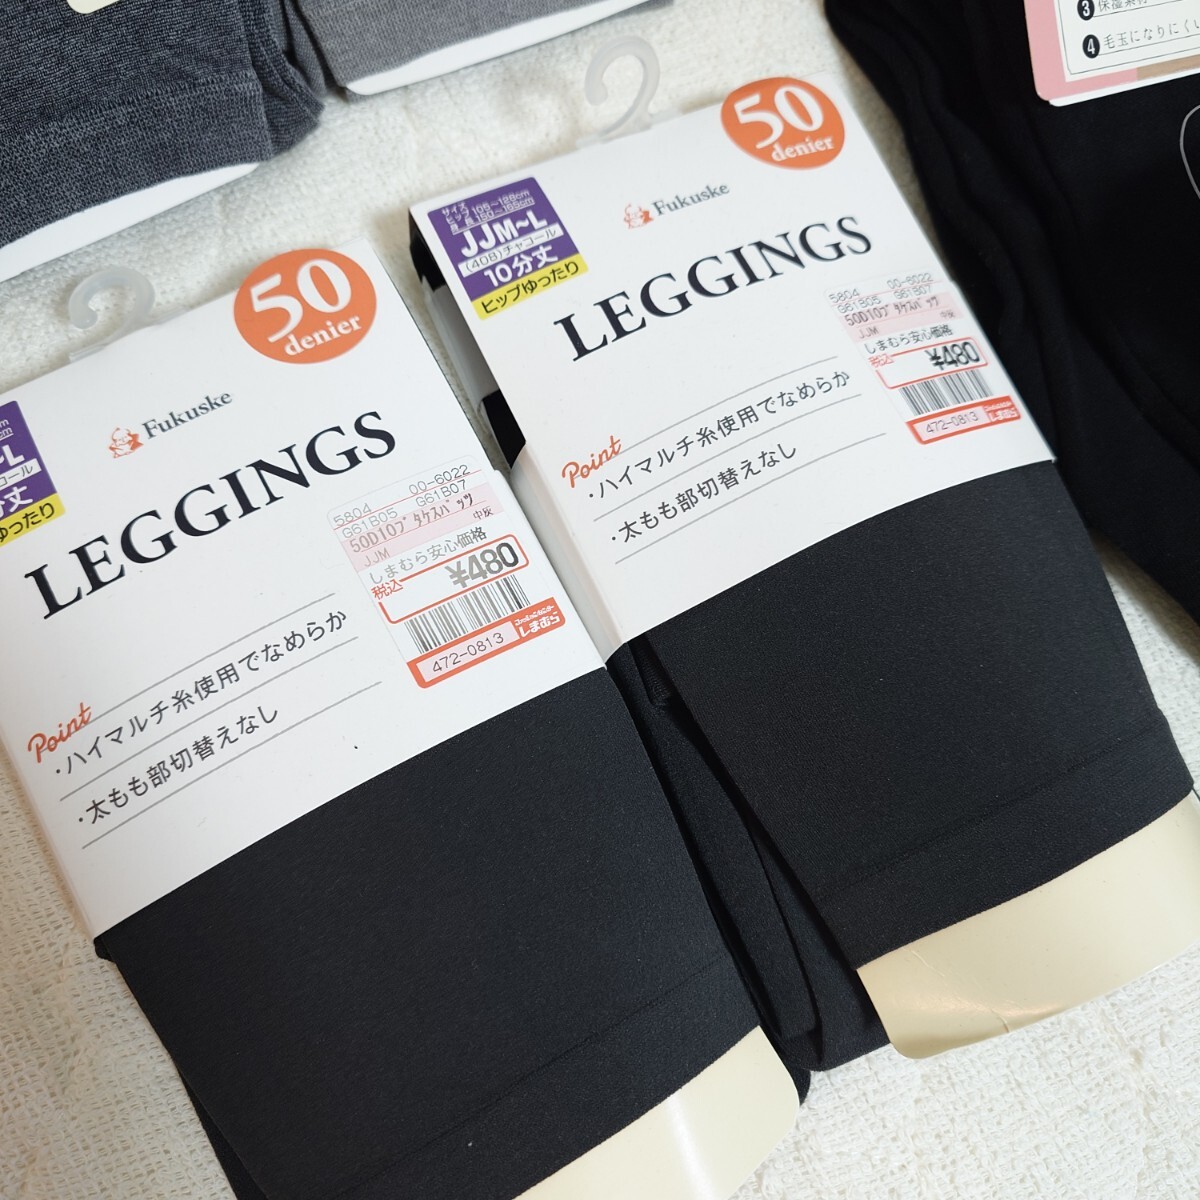  leggings * various *8 point together!